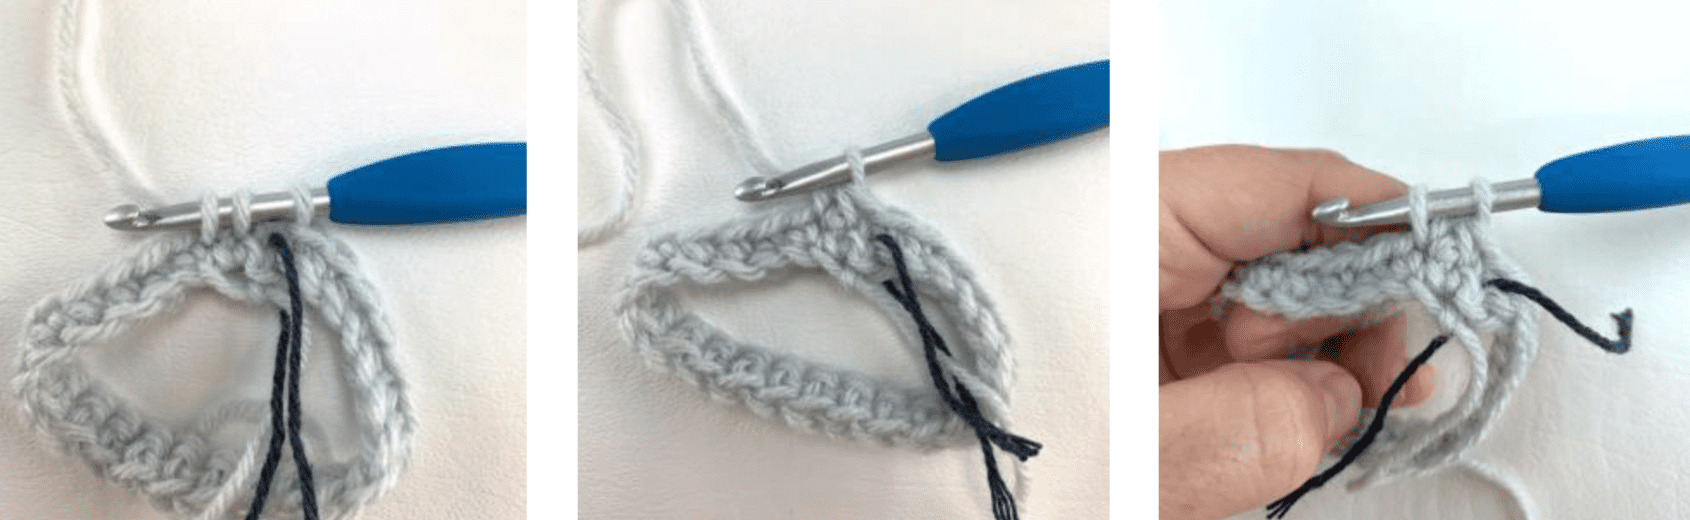 A Crocheted Simplicity